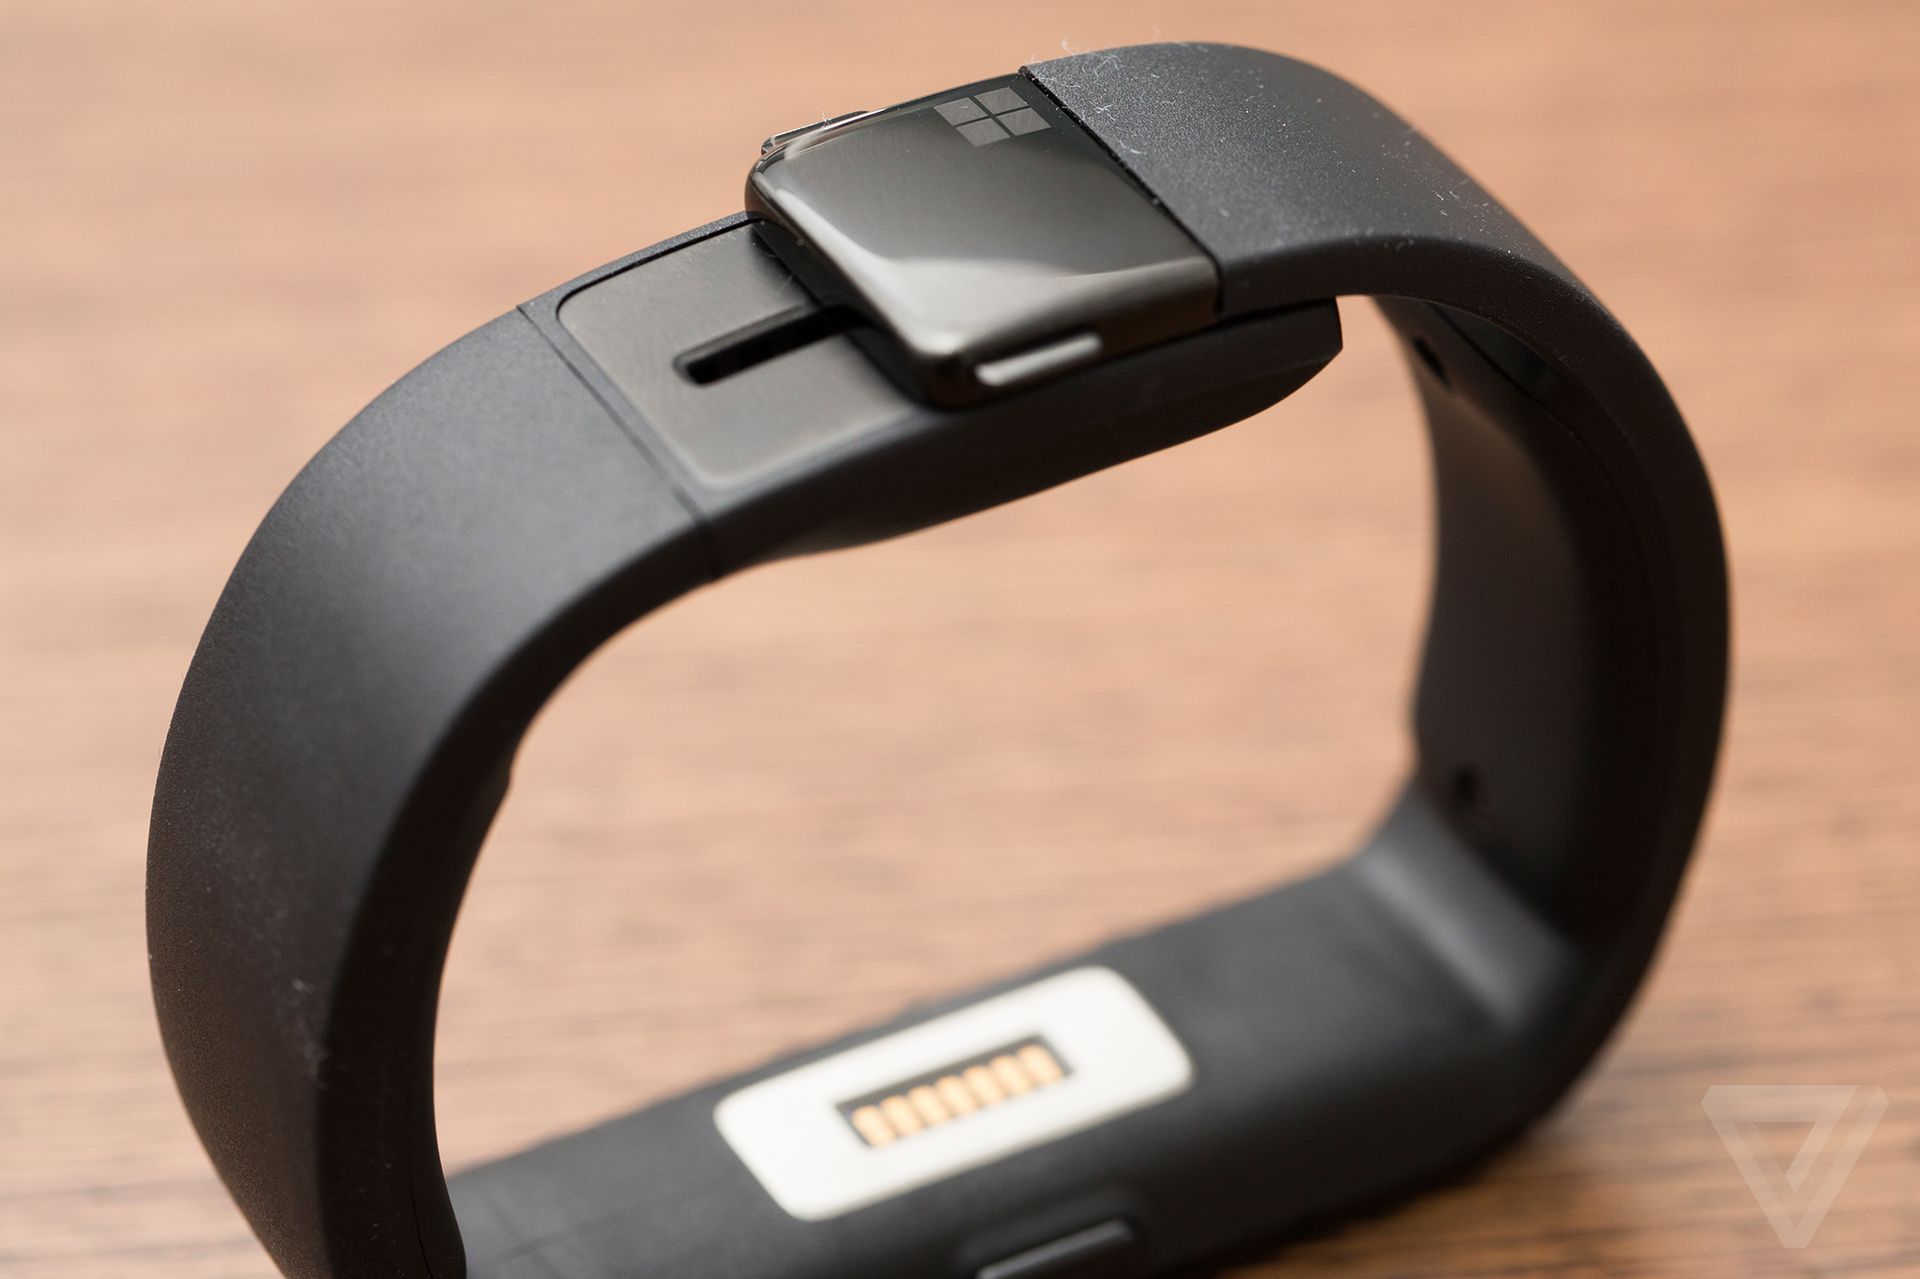 Wearing the Microsoft Band, the next big thing in fitness tracking ...